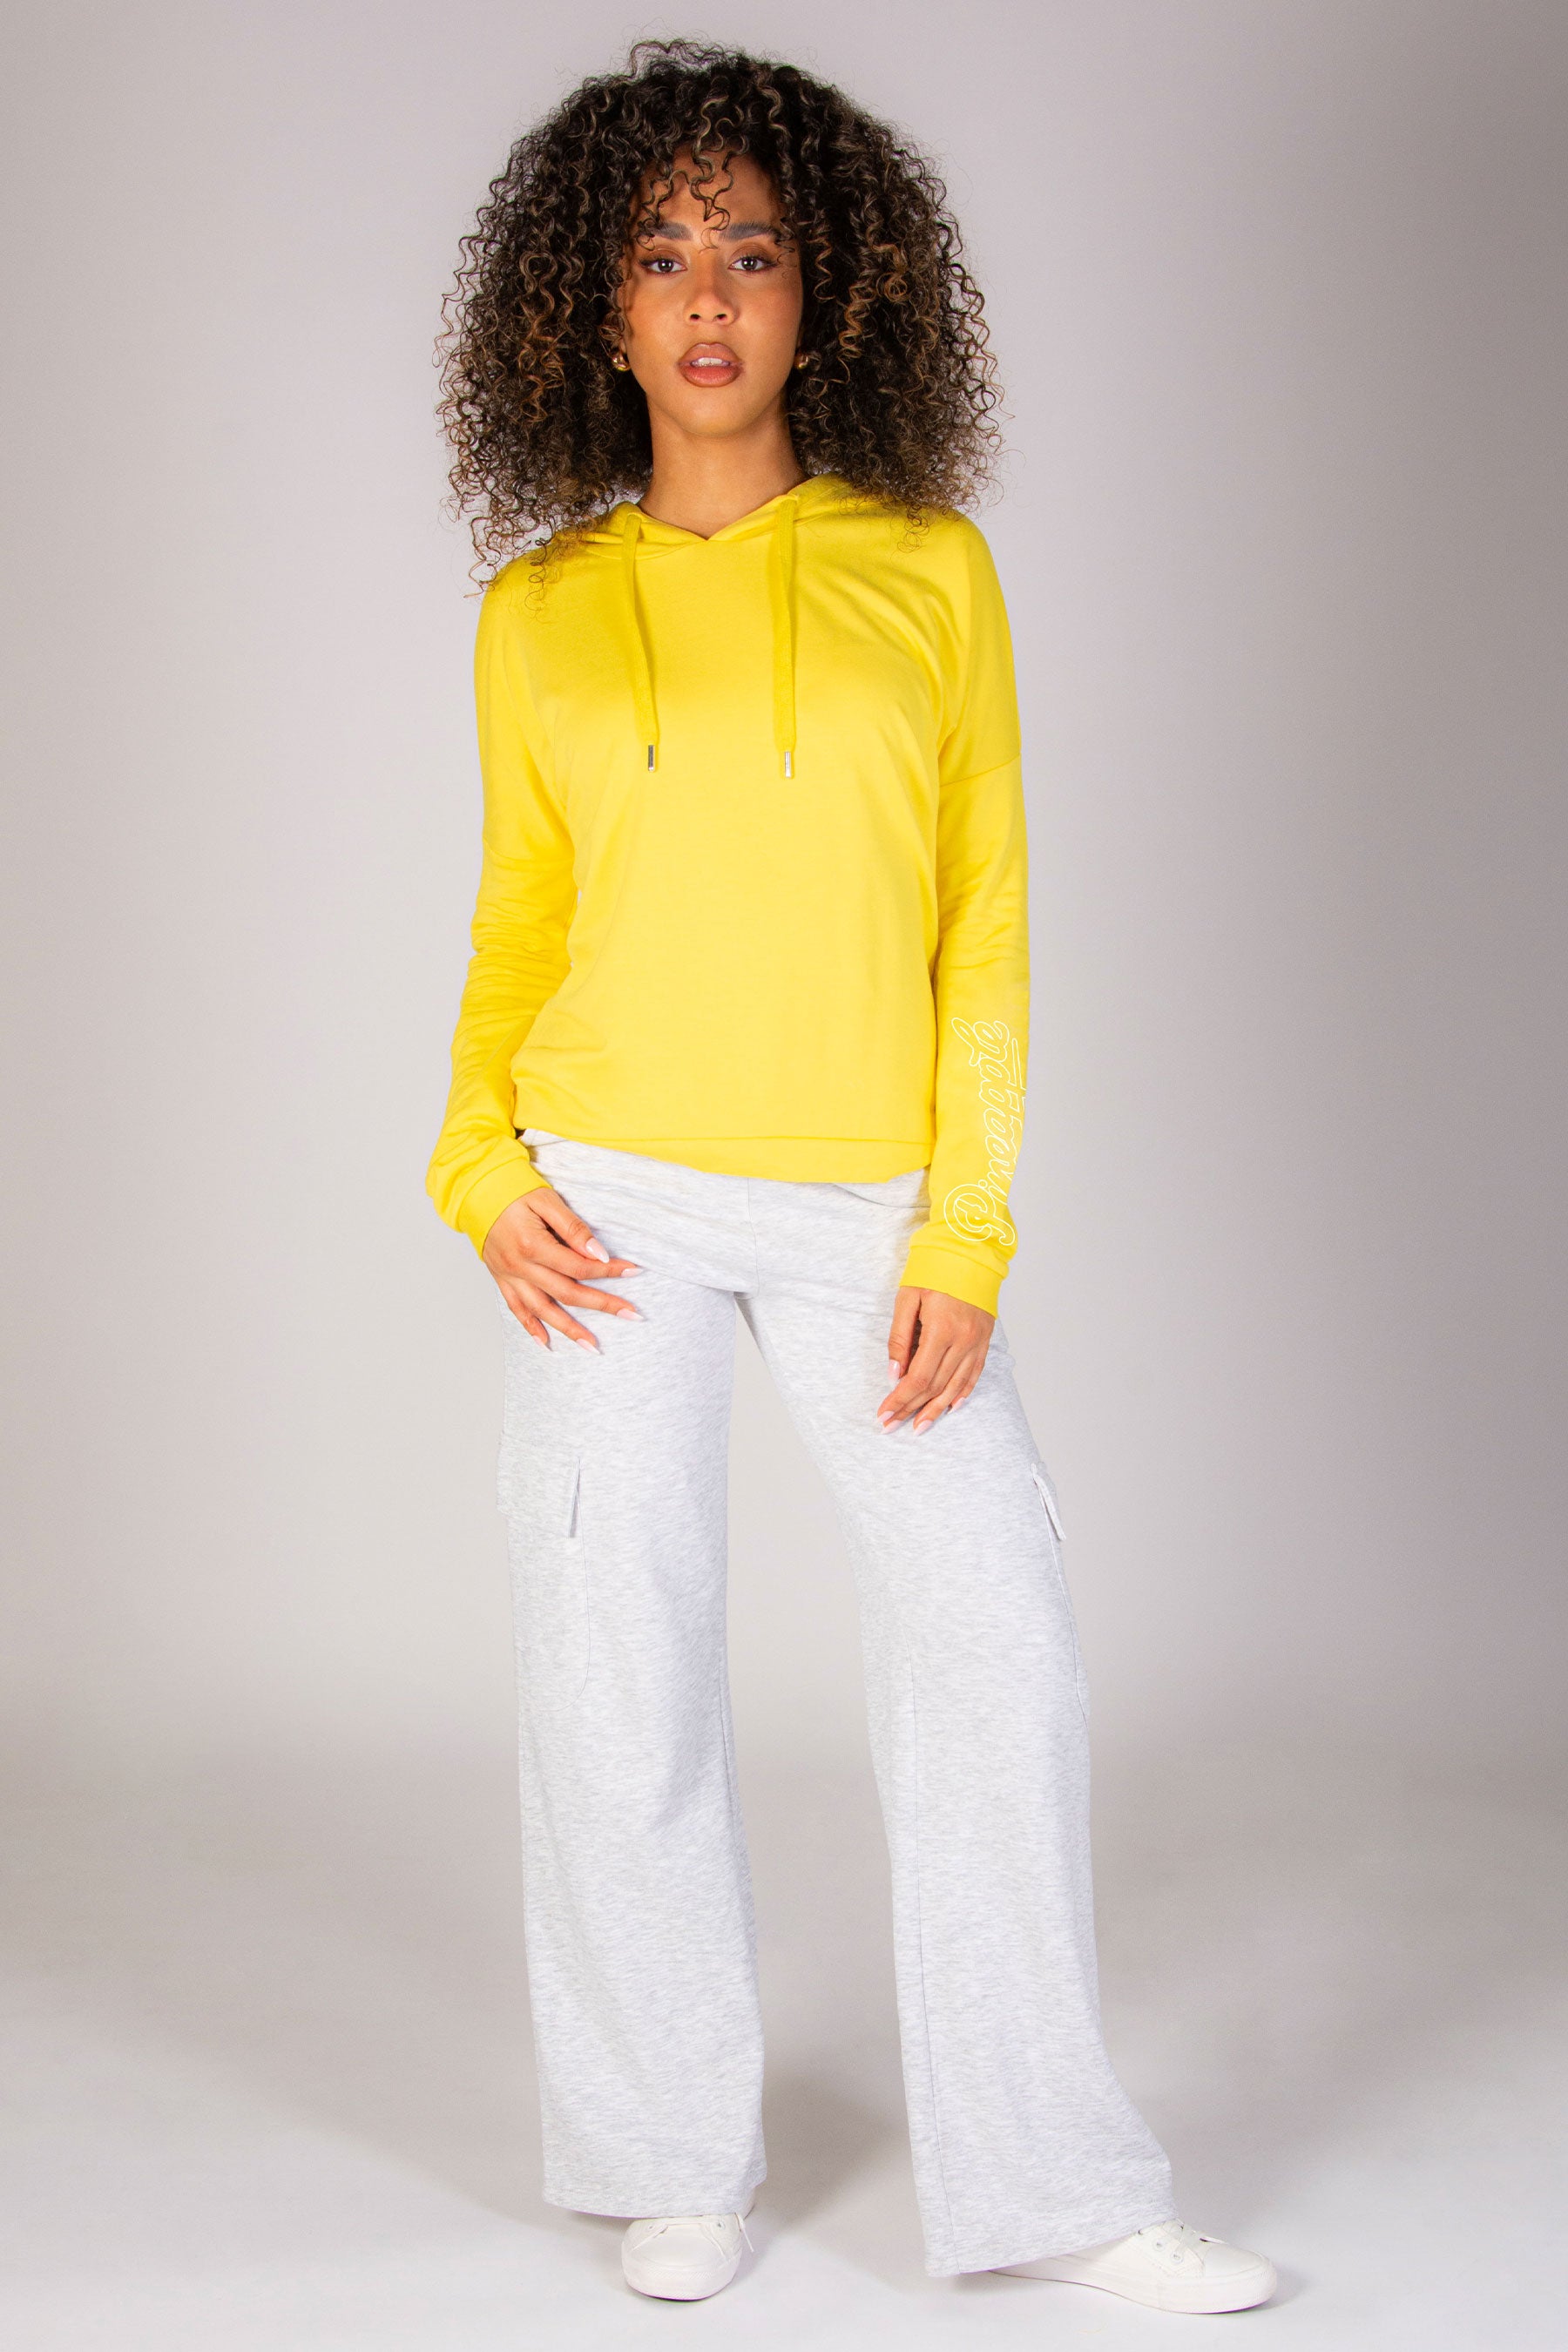 Shop Pineapple  Women's and Girls' Leisure & Dance Clothing